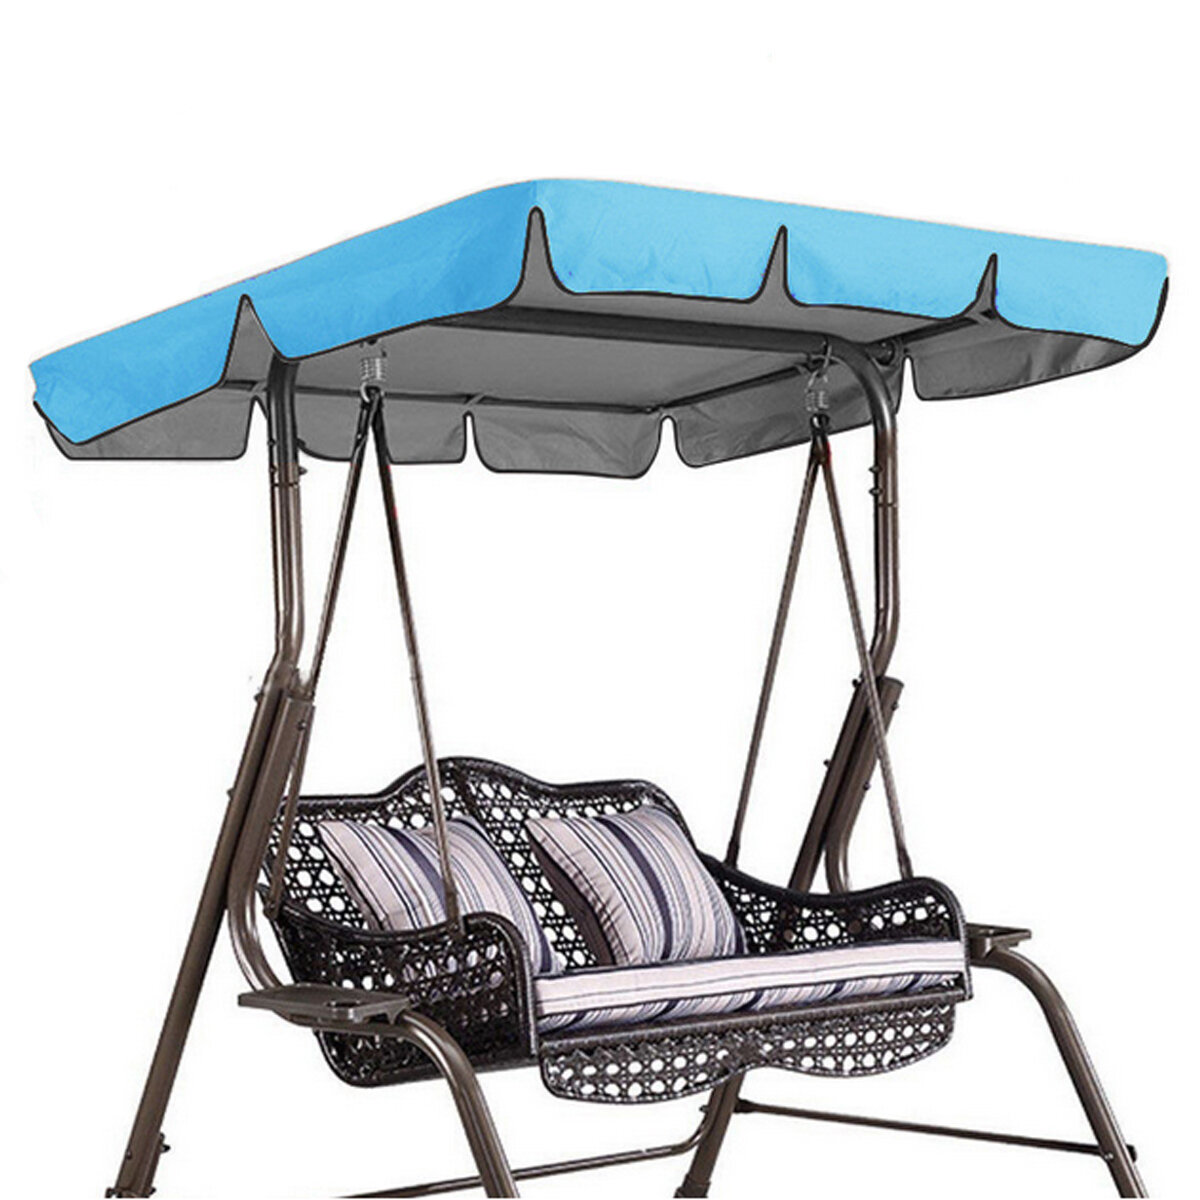 Image of 249x185x18cm Swing Chair Top Cover Replacement Canopy Porch Park Patio Outdoor Garden